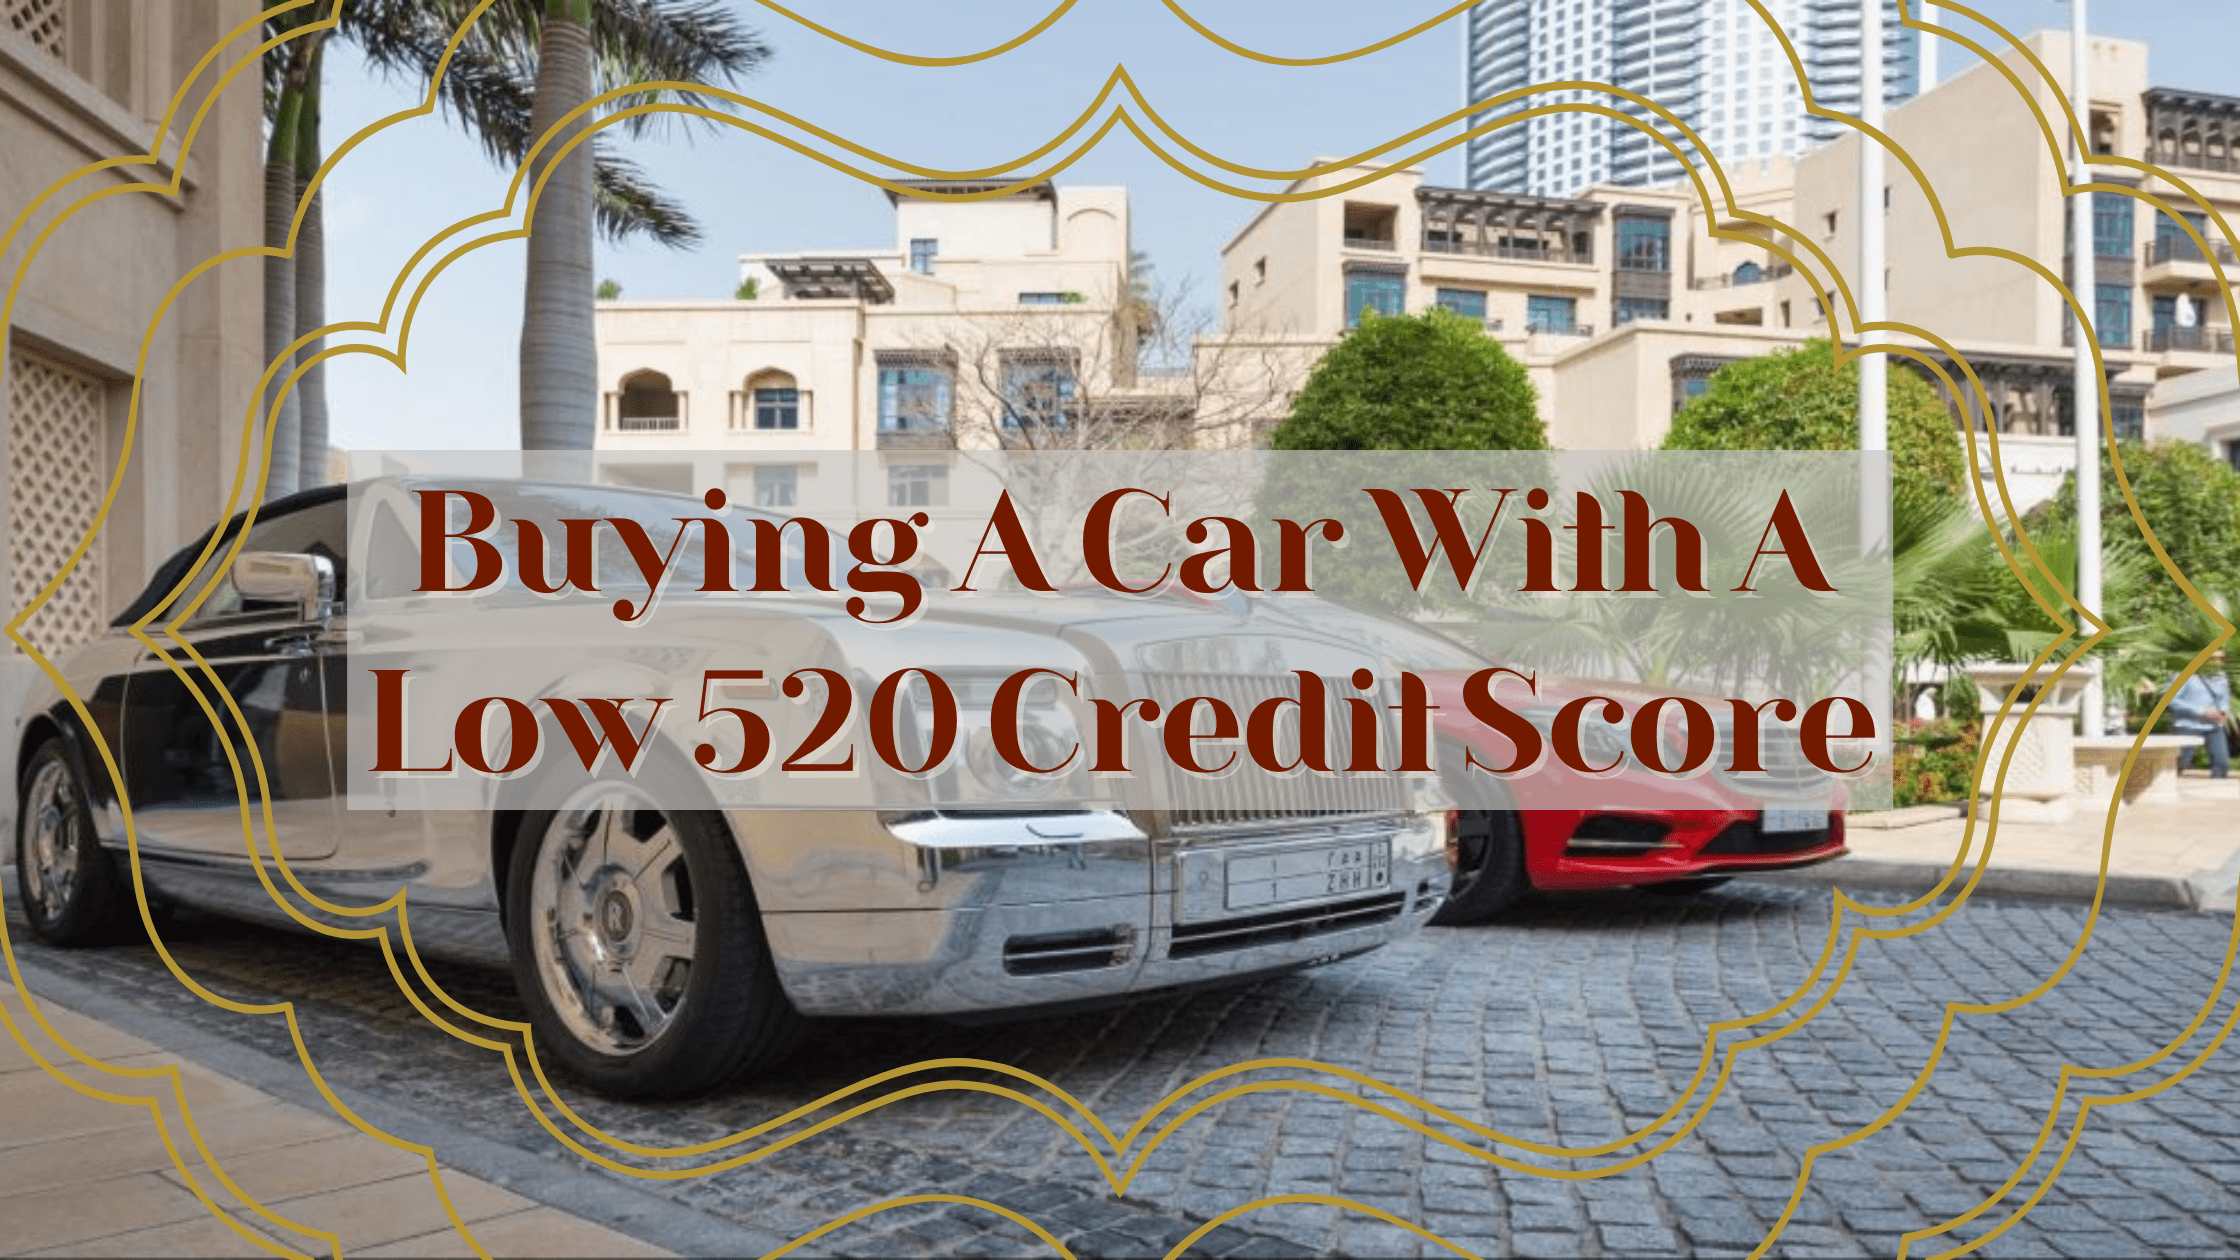 Buying A Car With A Low 520 Credit Score